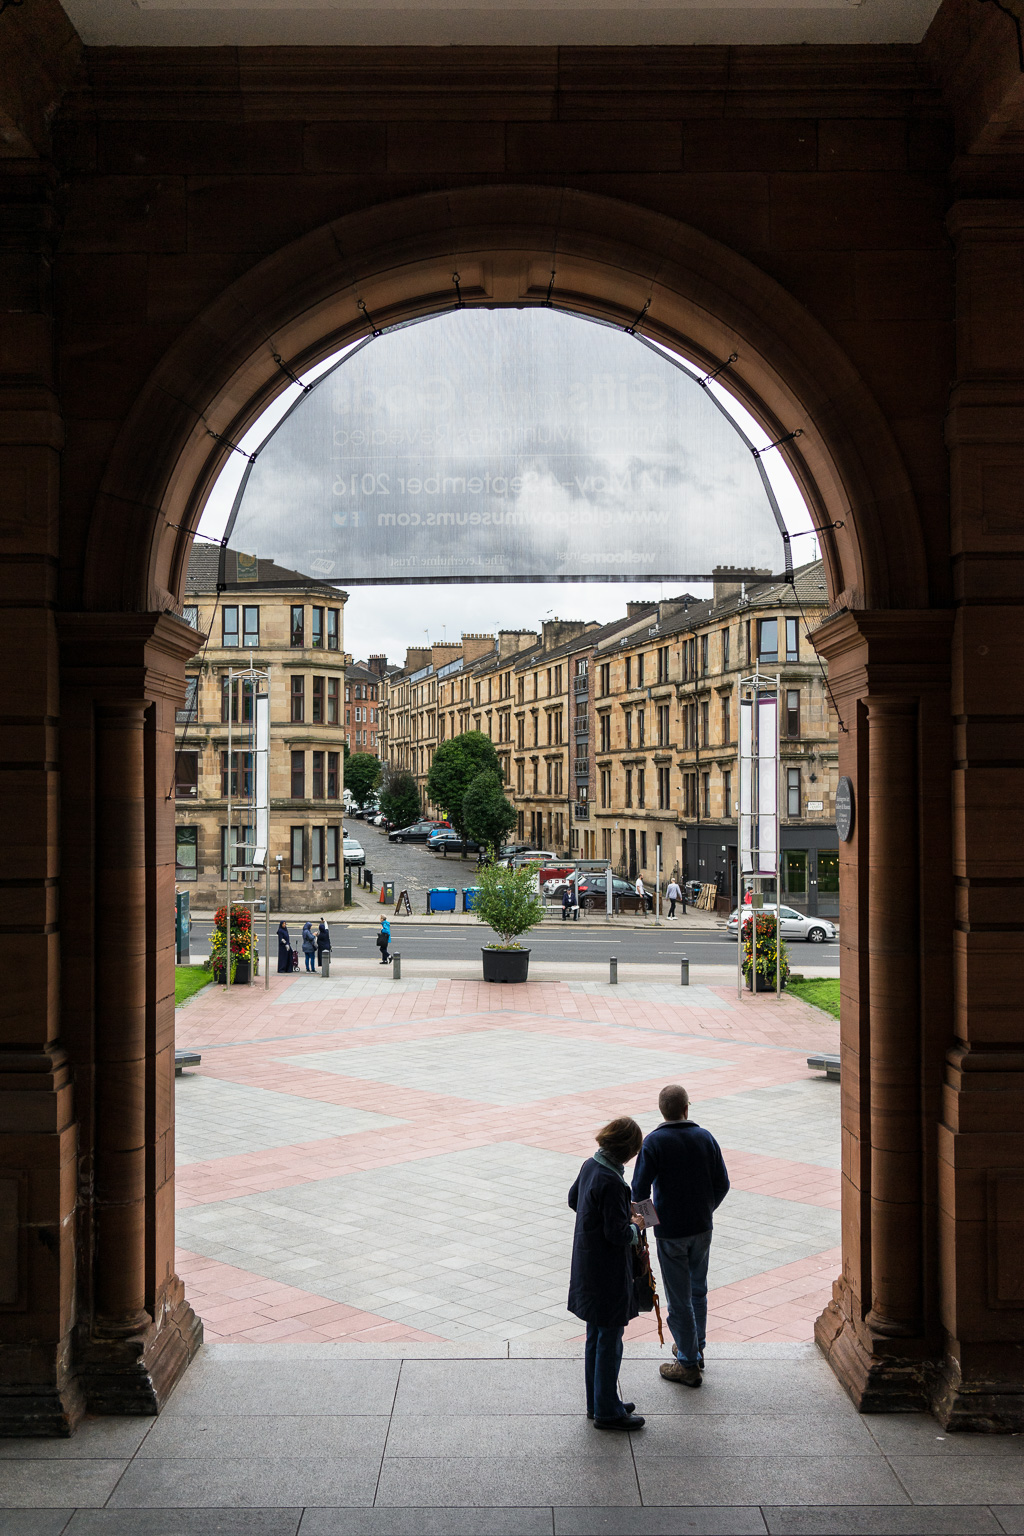 View from the southwest entrance to the Kelvingrove Art Gallery and Museum, Glasgow, Scotland